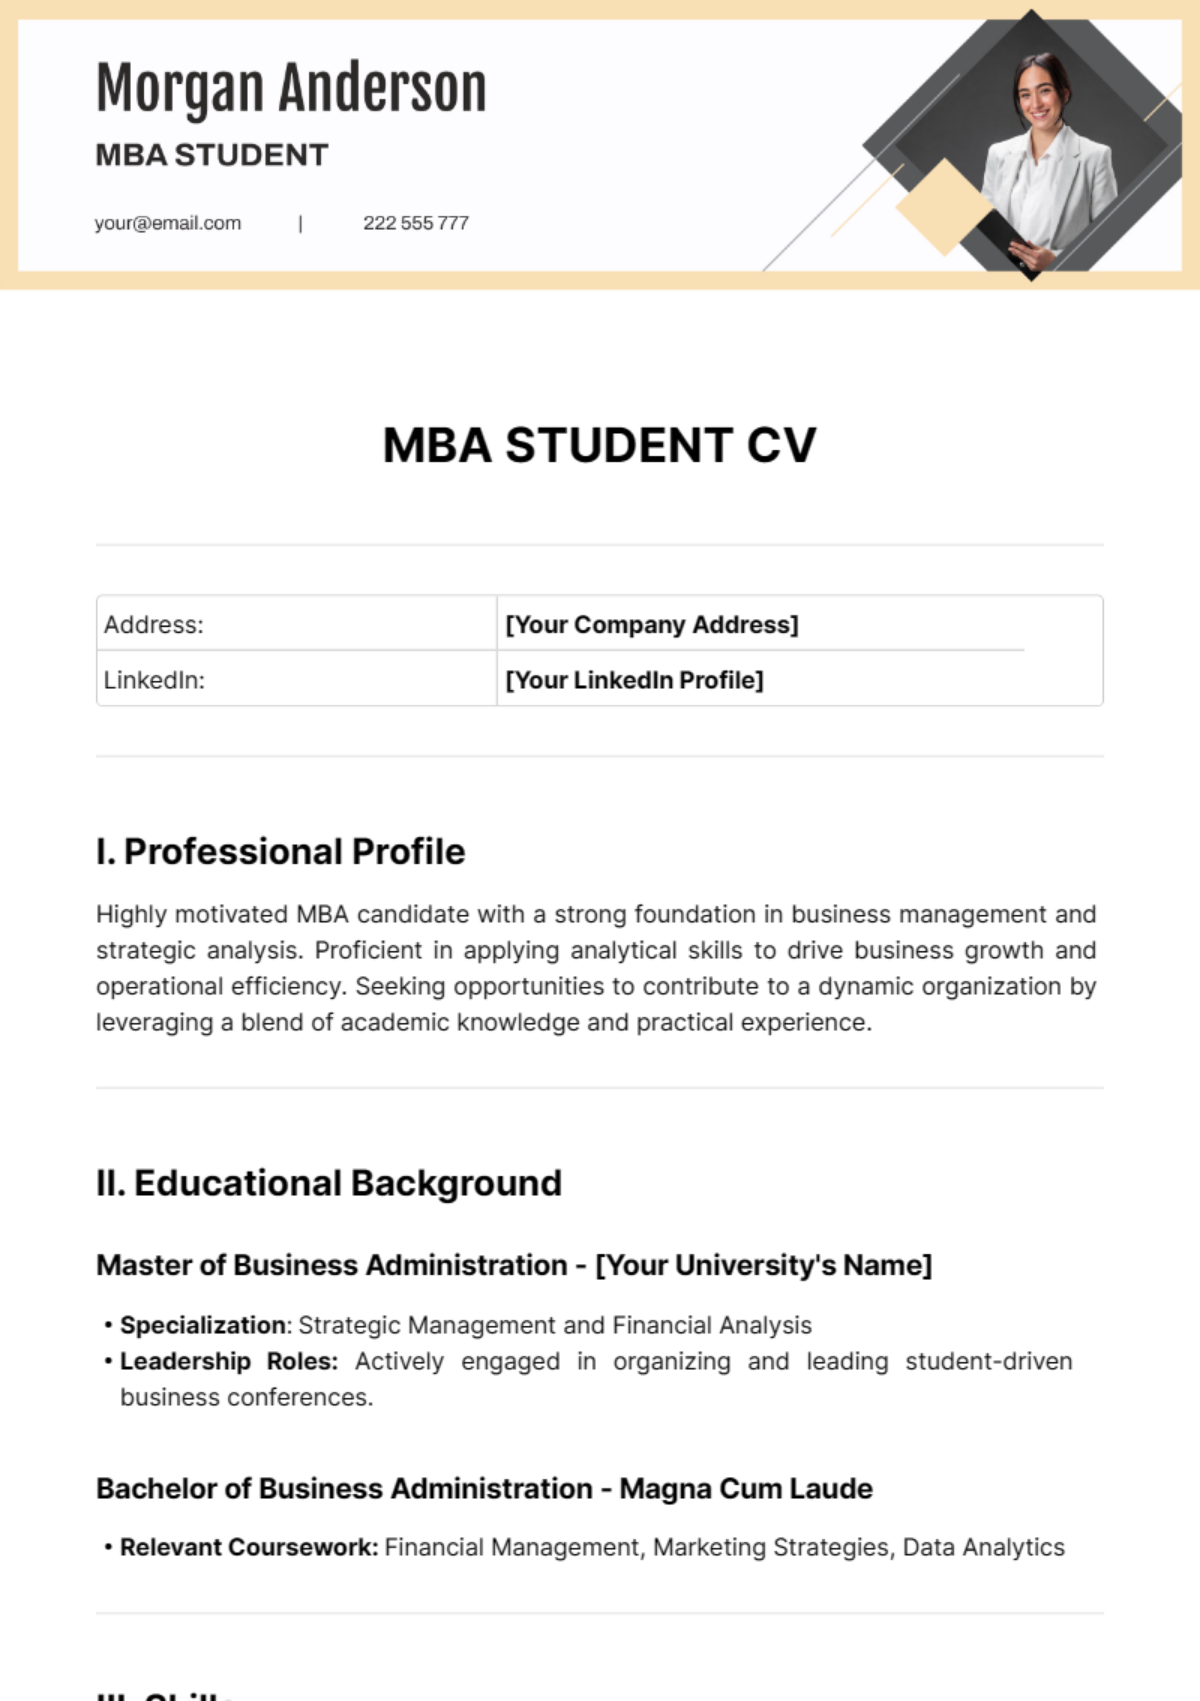 Free MBA Student CV Template